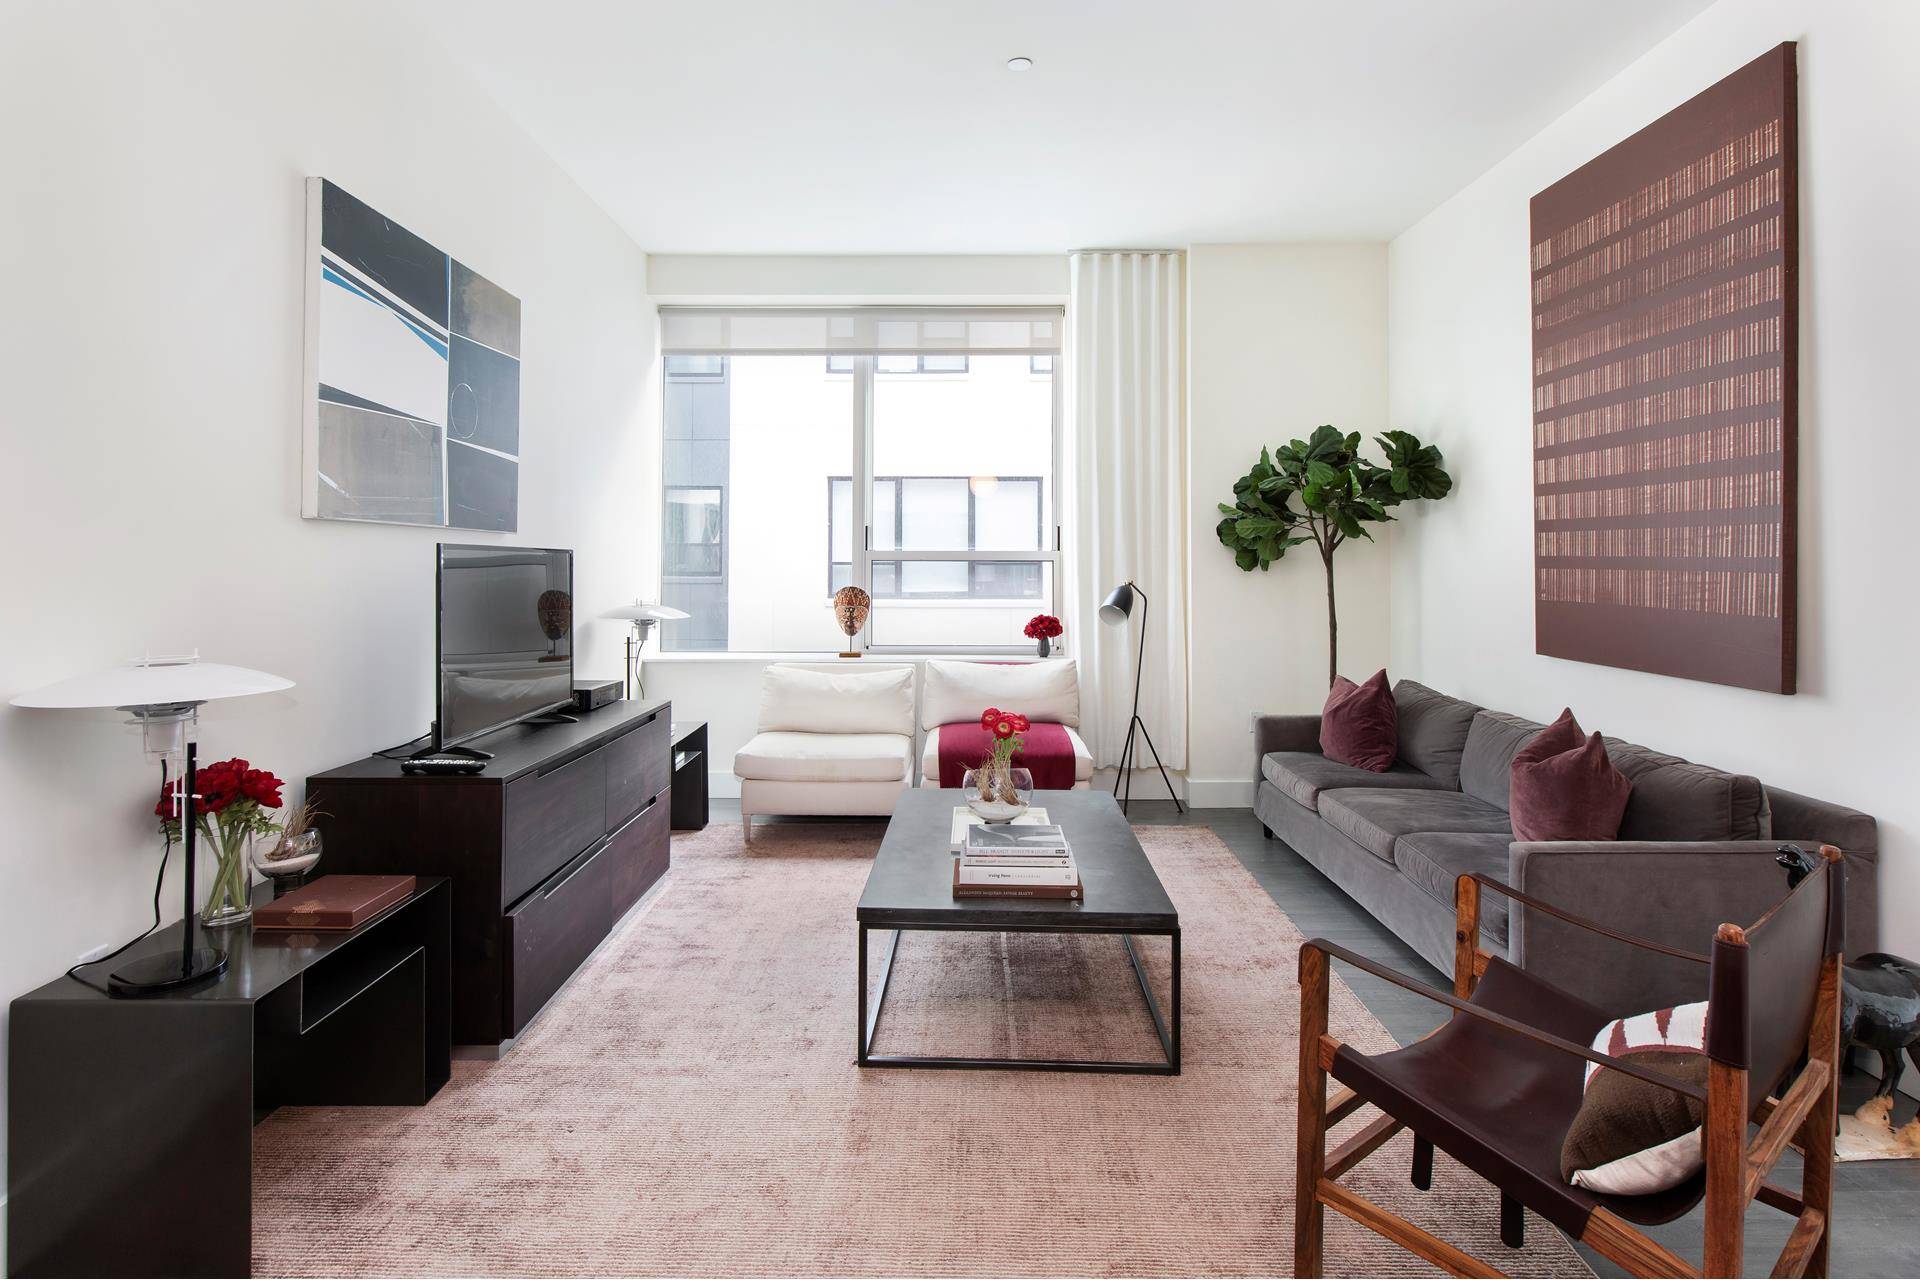 Renovated Two Bedroom, two bathroom condominium located in a luxurious amenity driven condo in prime Hell's Kitchen.